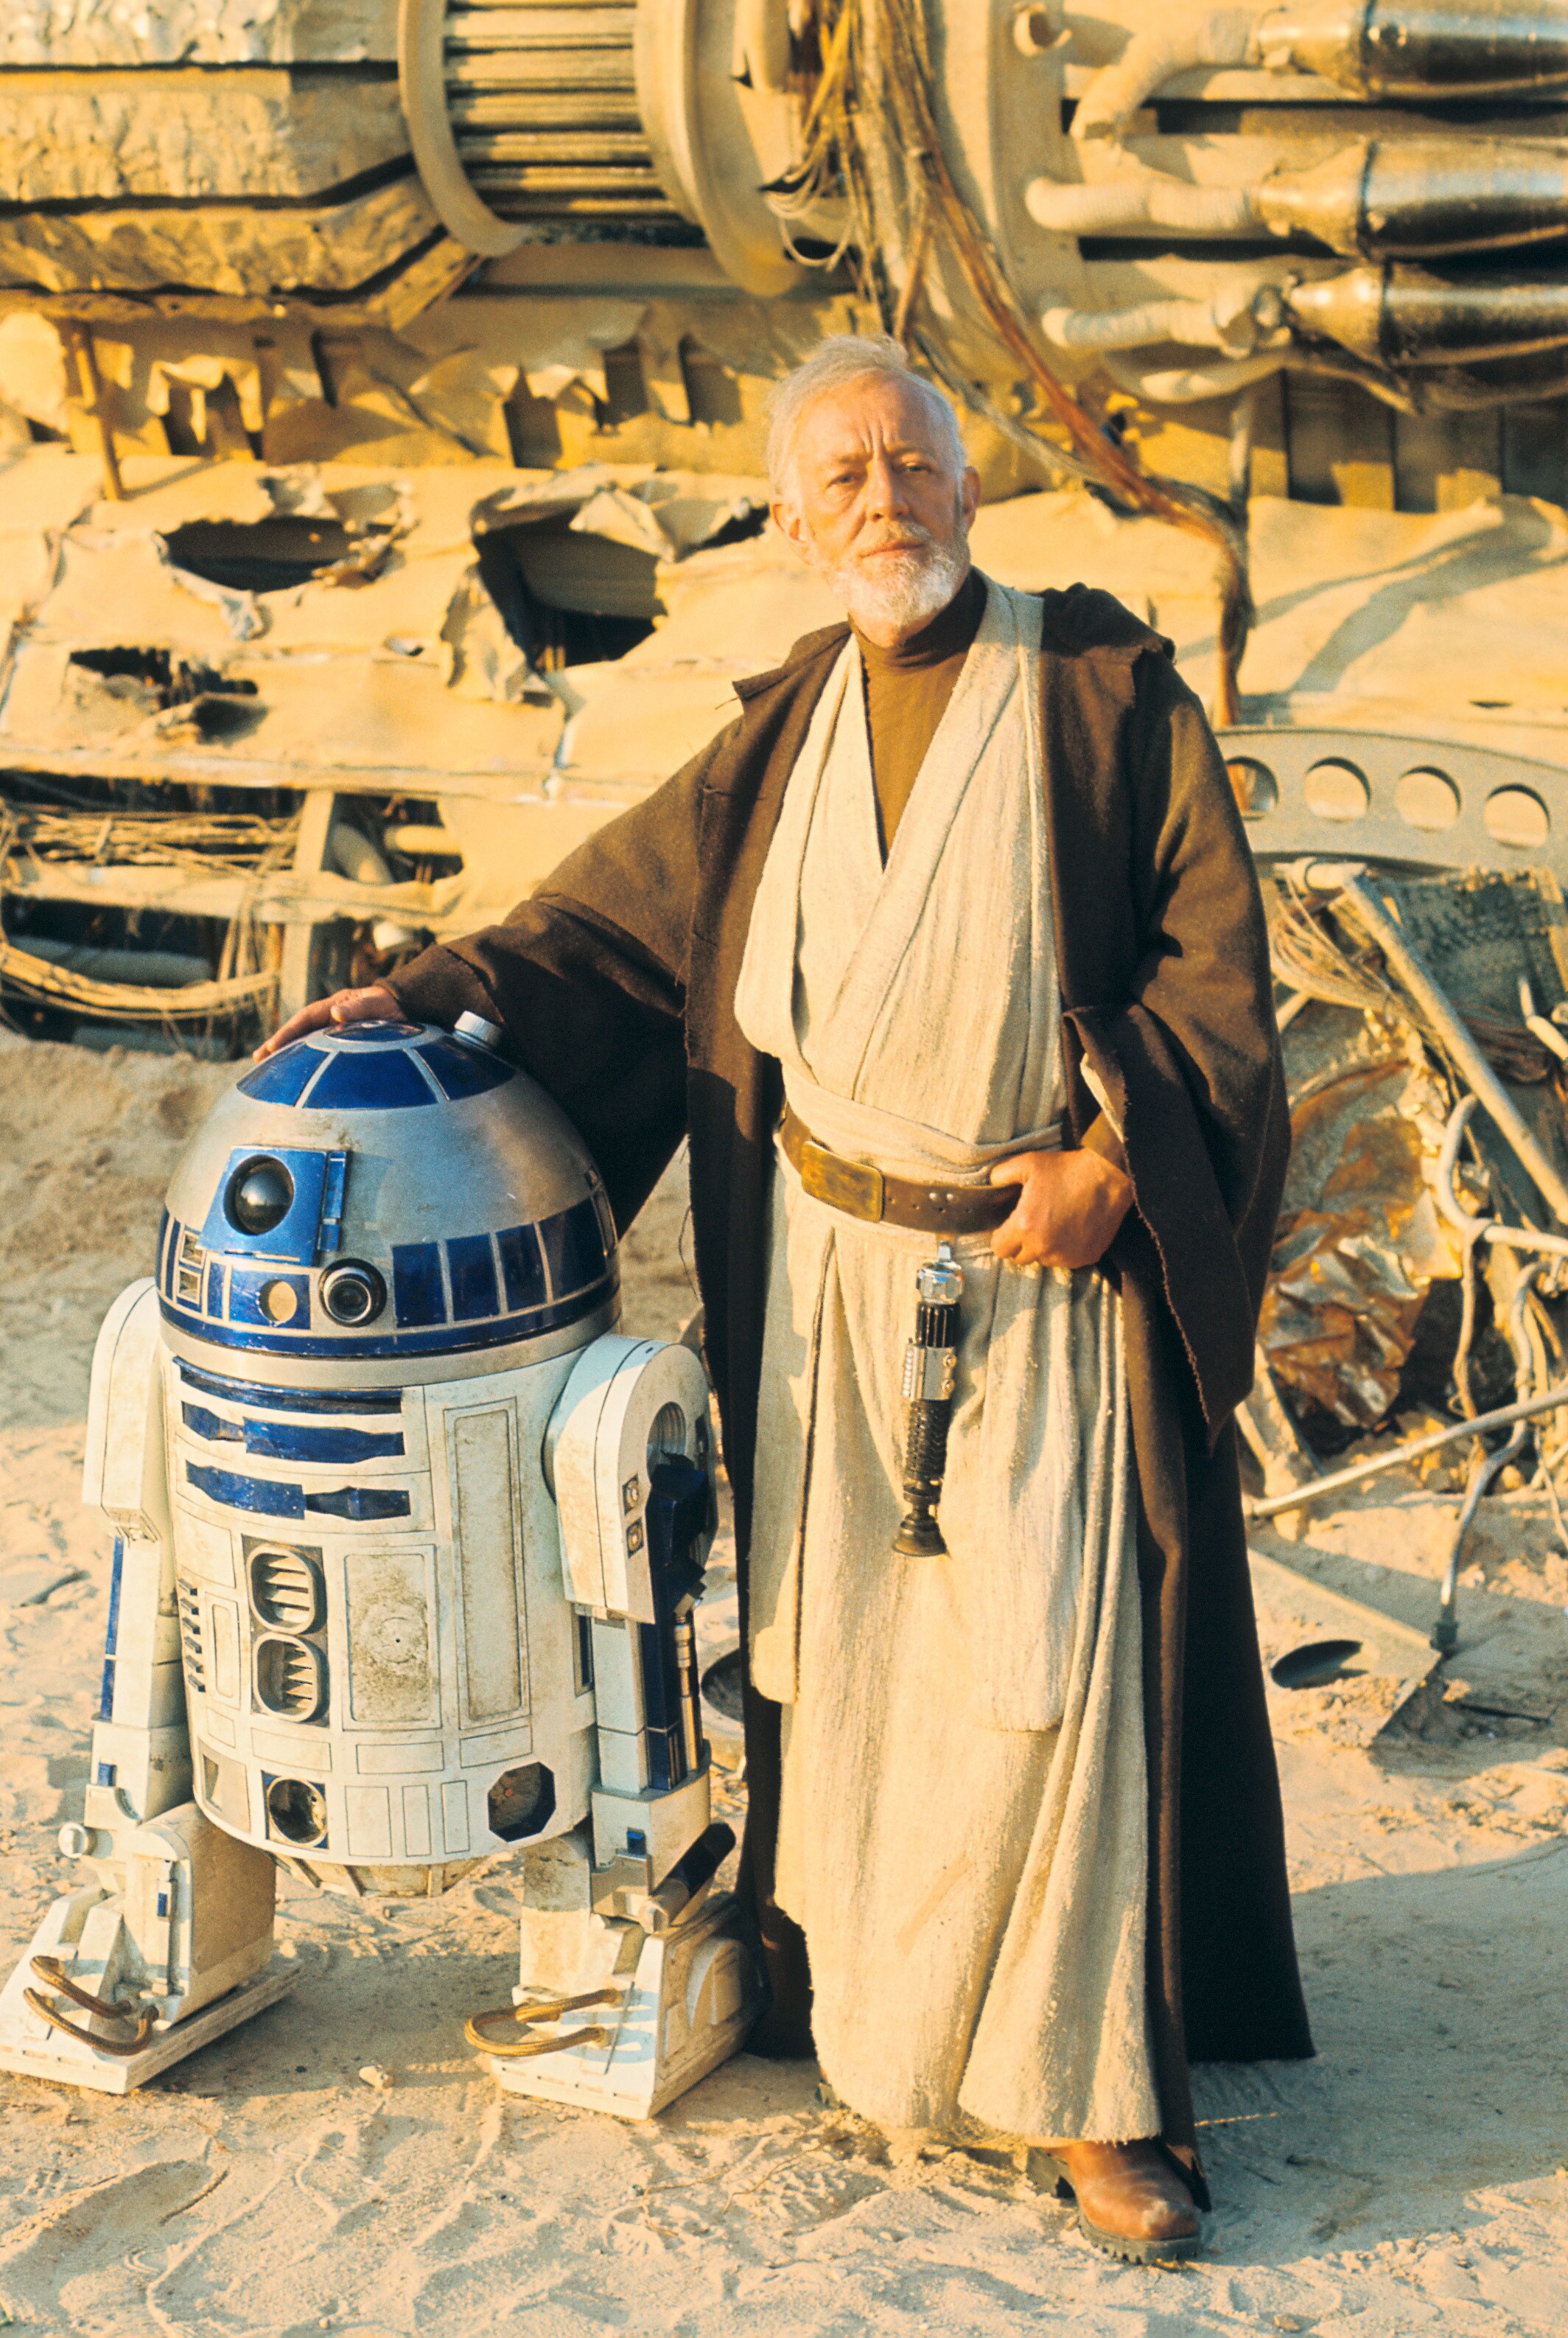 R2-D2 and Alec Guinness on-set in Tunisia.